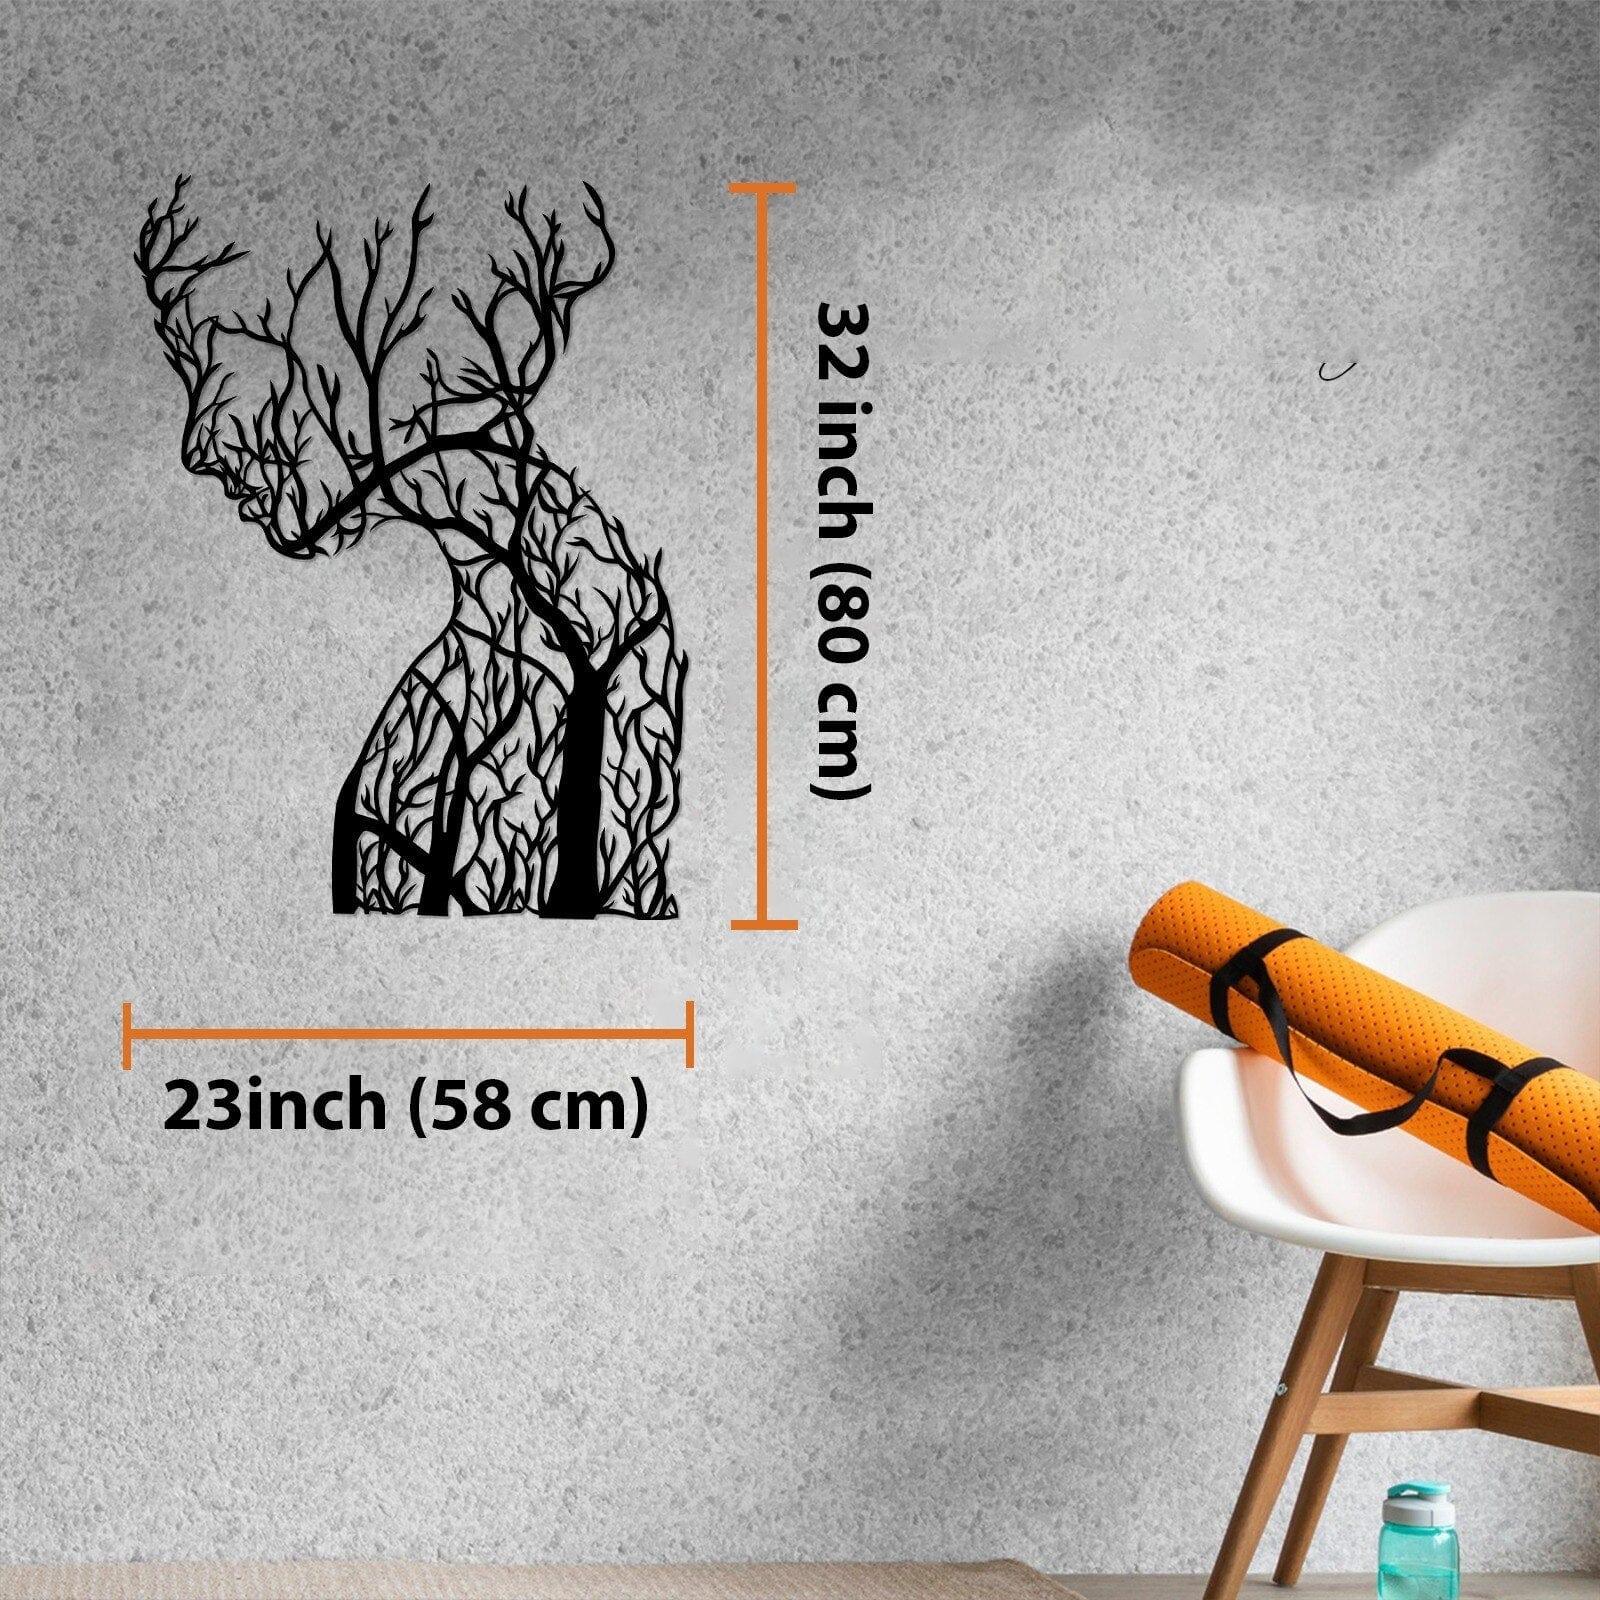 Shop 0 Woman Tree Metal Wall Art Female Face Woman Silhouette Abstract Wall Sculpture Modern Black Line Art Interior Decoration Mademoiselle Home Decor